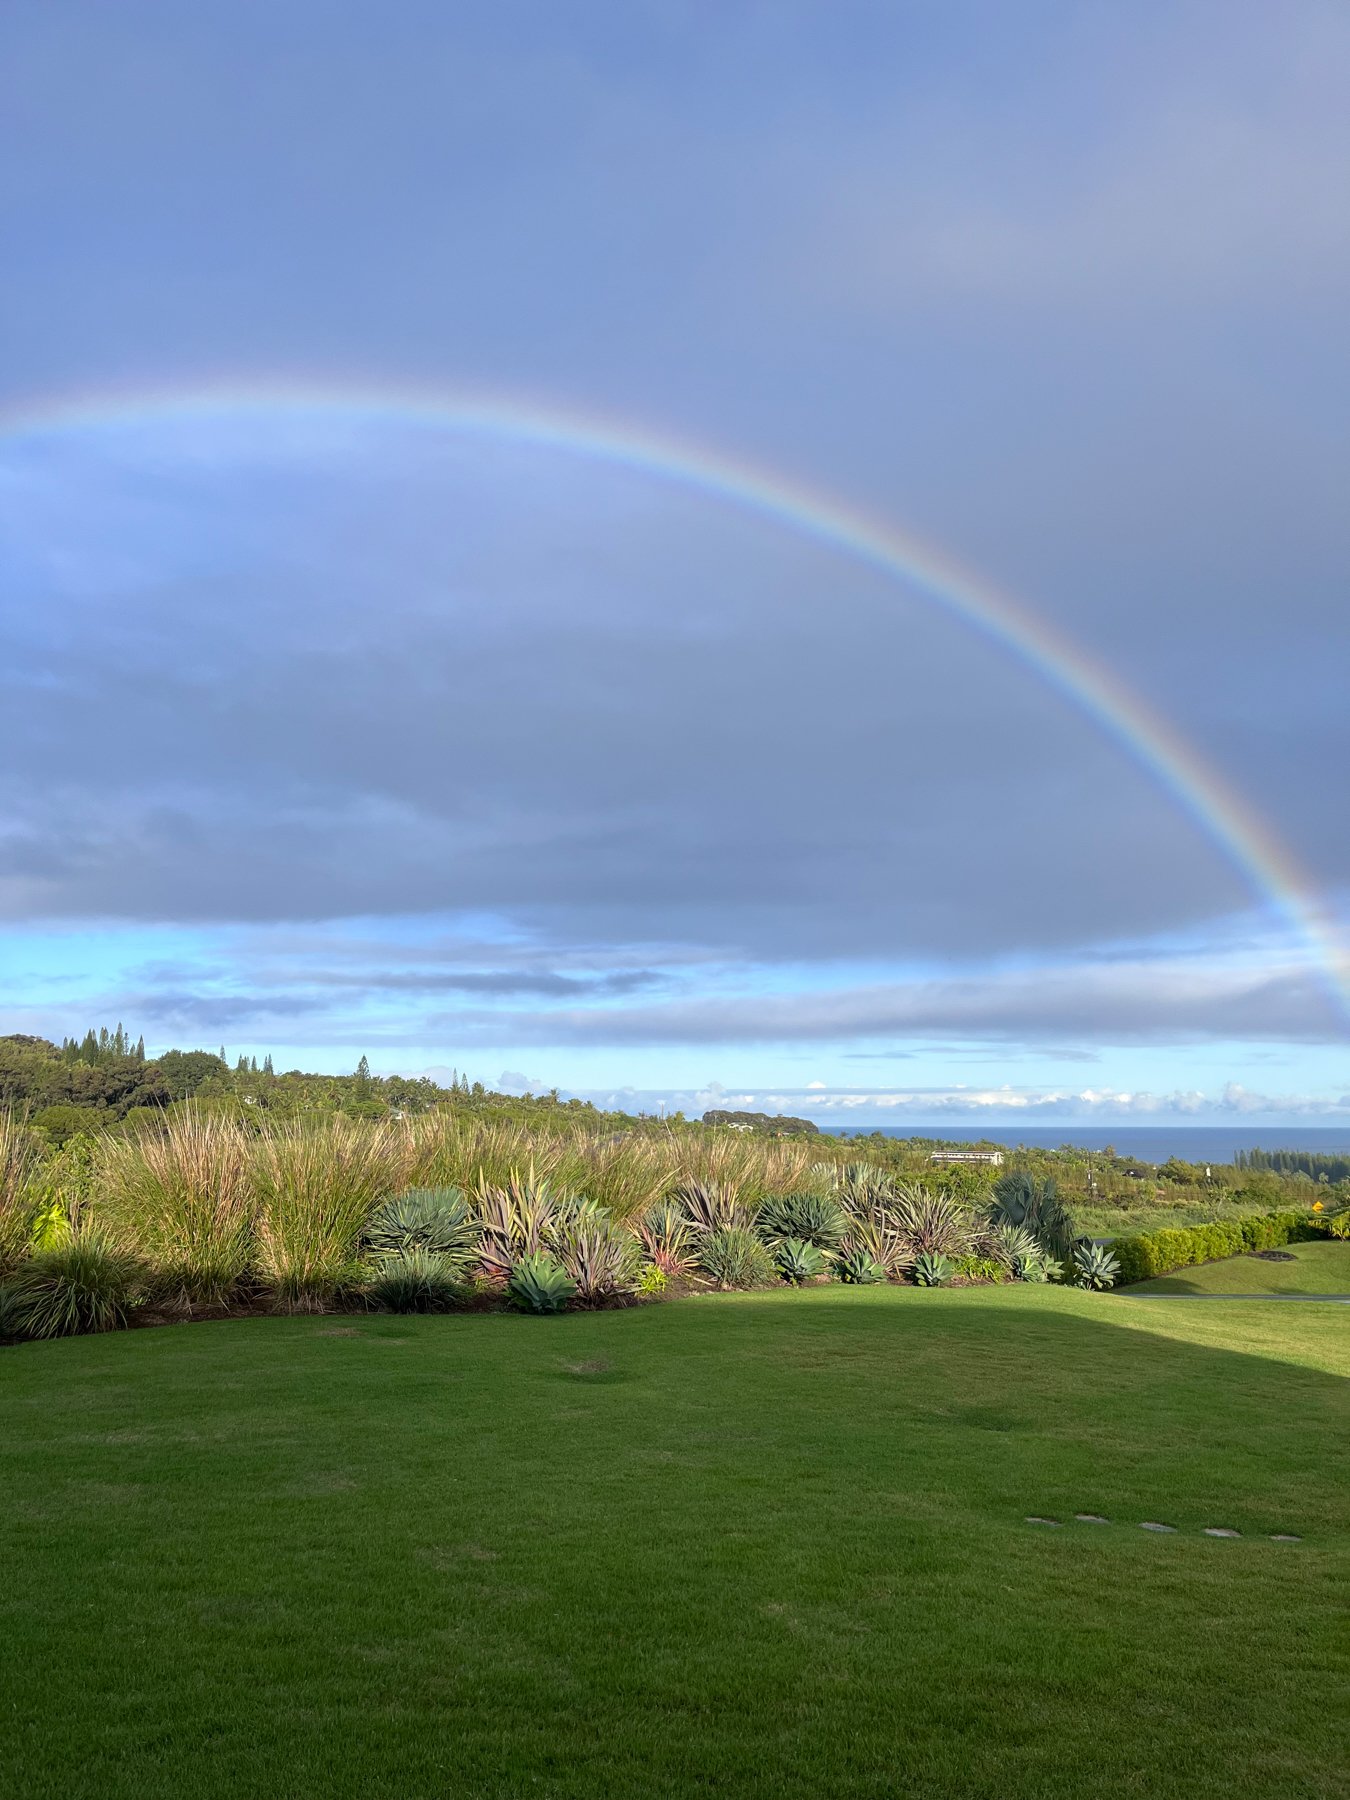 Early morning rainbow over Maui, the Pacific Ocean in the background 